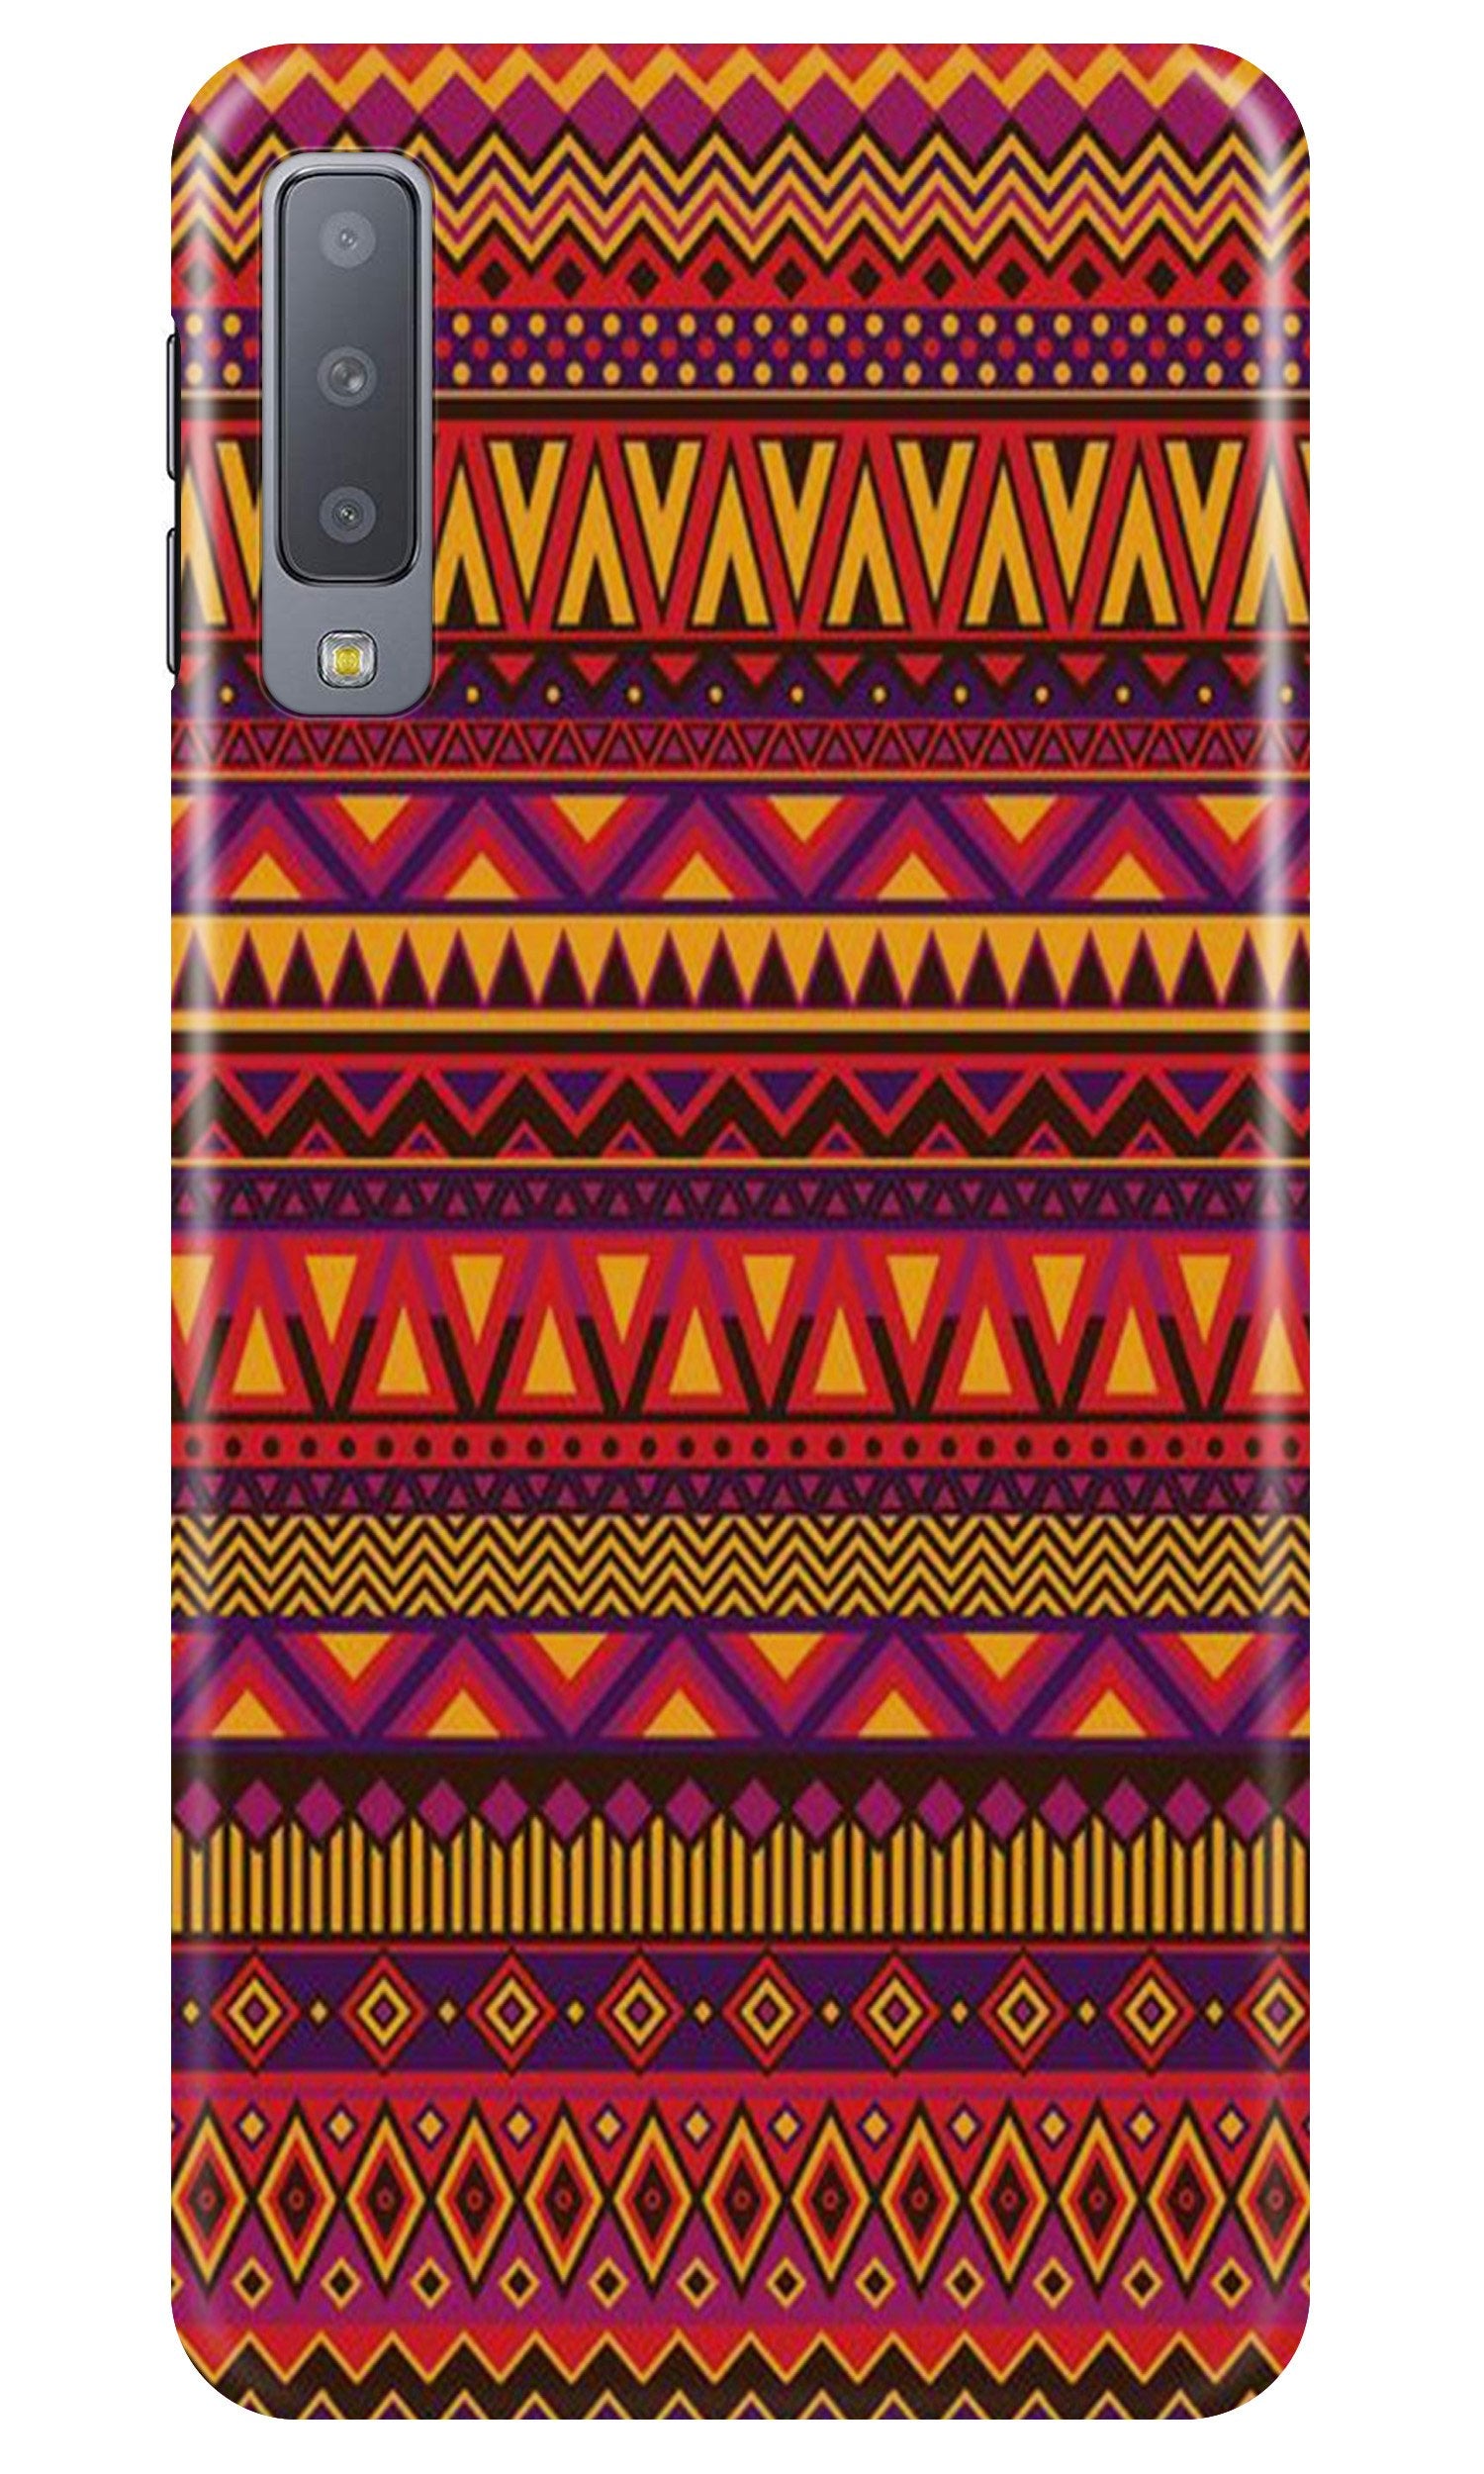 Zigzag line pattern2 Case for Samsung Galaxy A50s